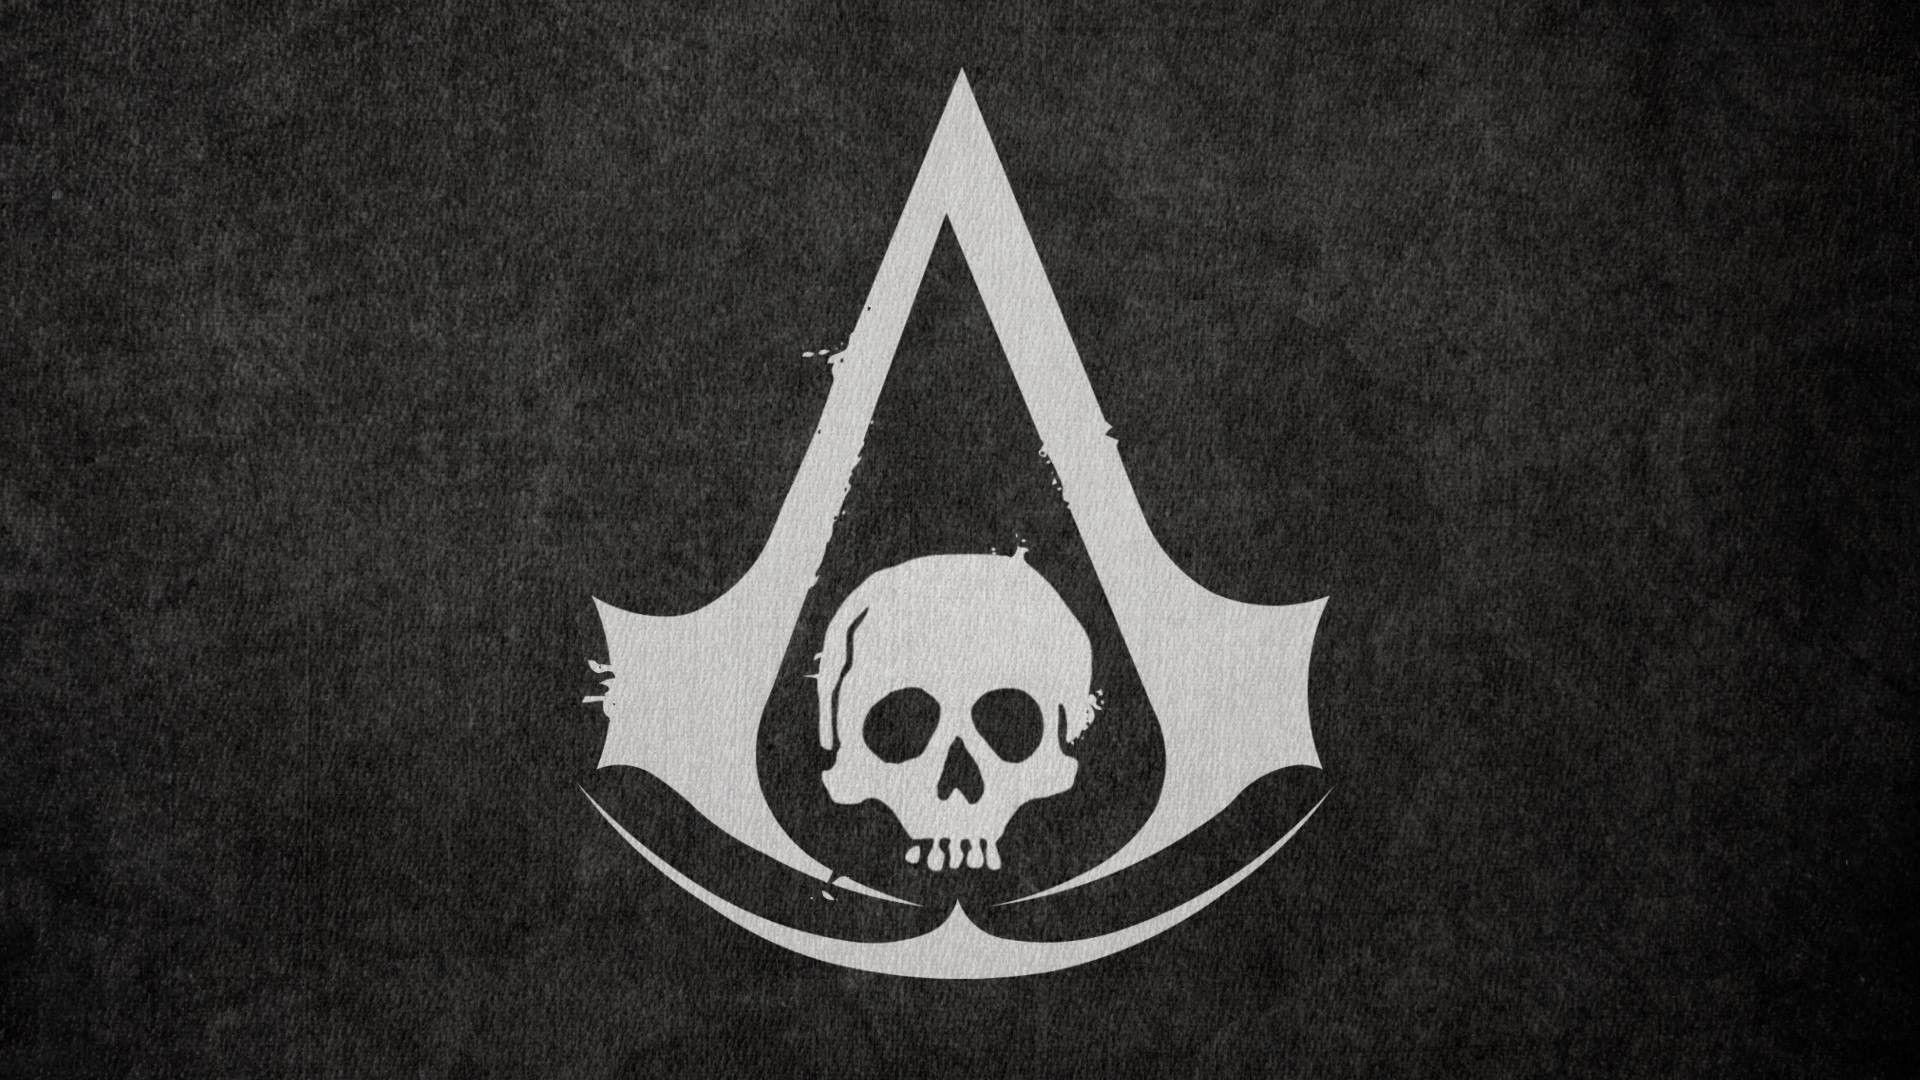 Assassin's Creed Wallpapers (67+ images inside)